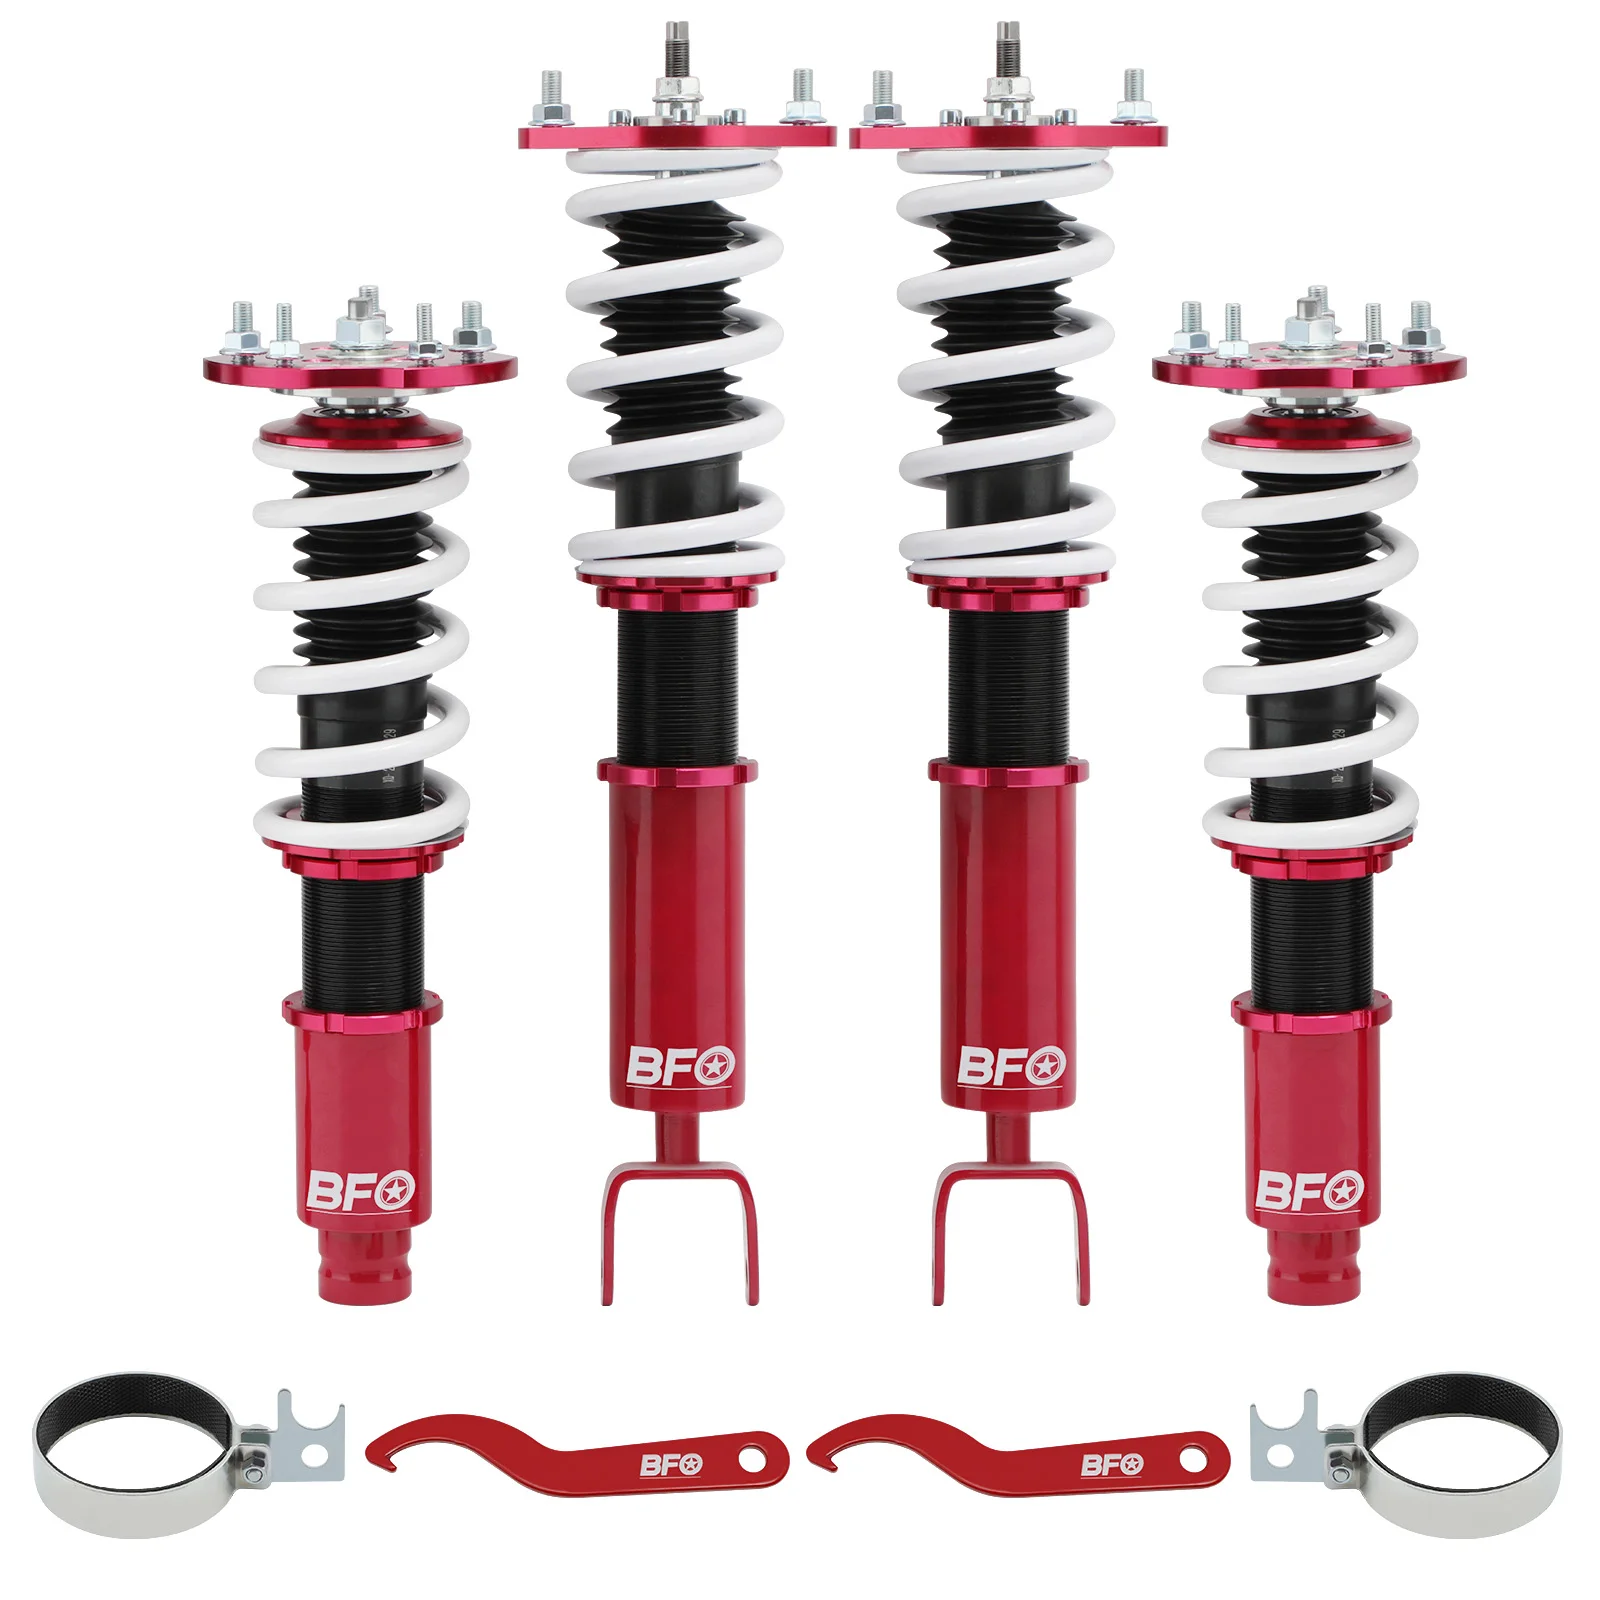 

BFO Adjustable Height Coilover Lowering Kit for Honda Prelude 1992-2001 BB1/BB2 Coilovers Suspension Spring Shock Struts